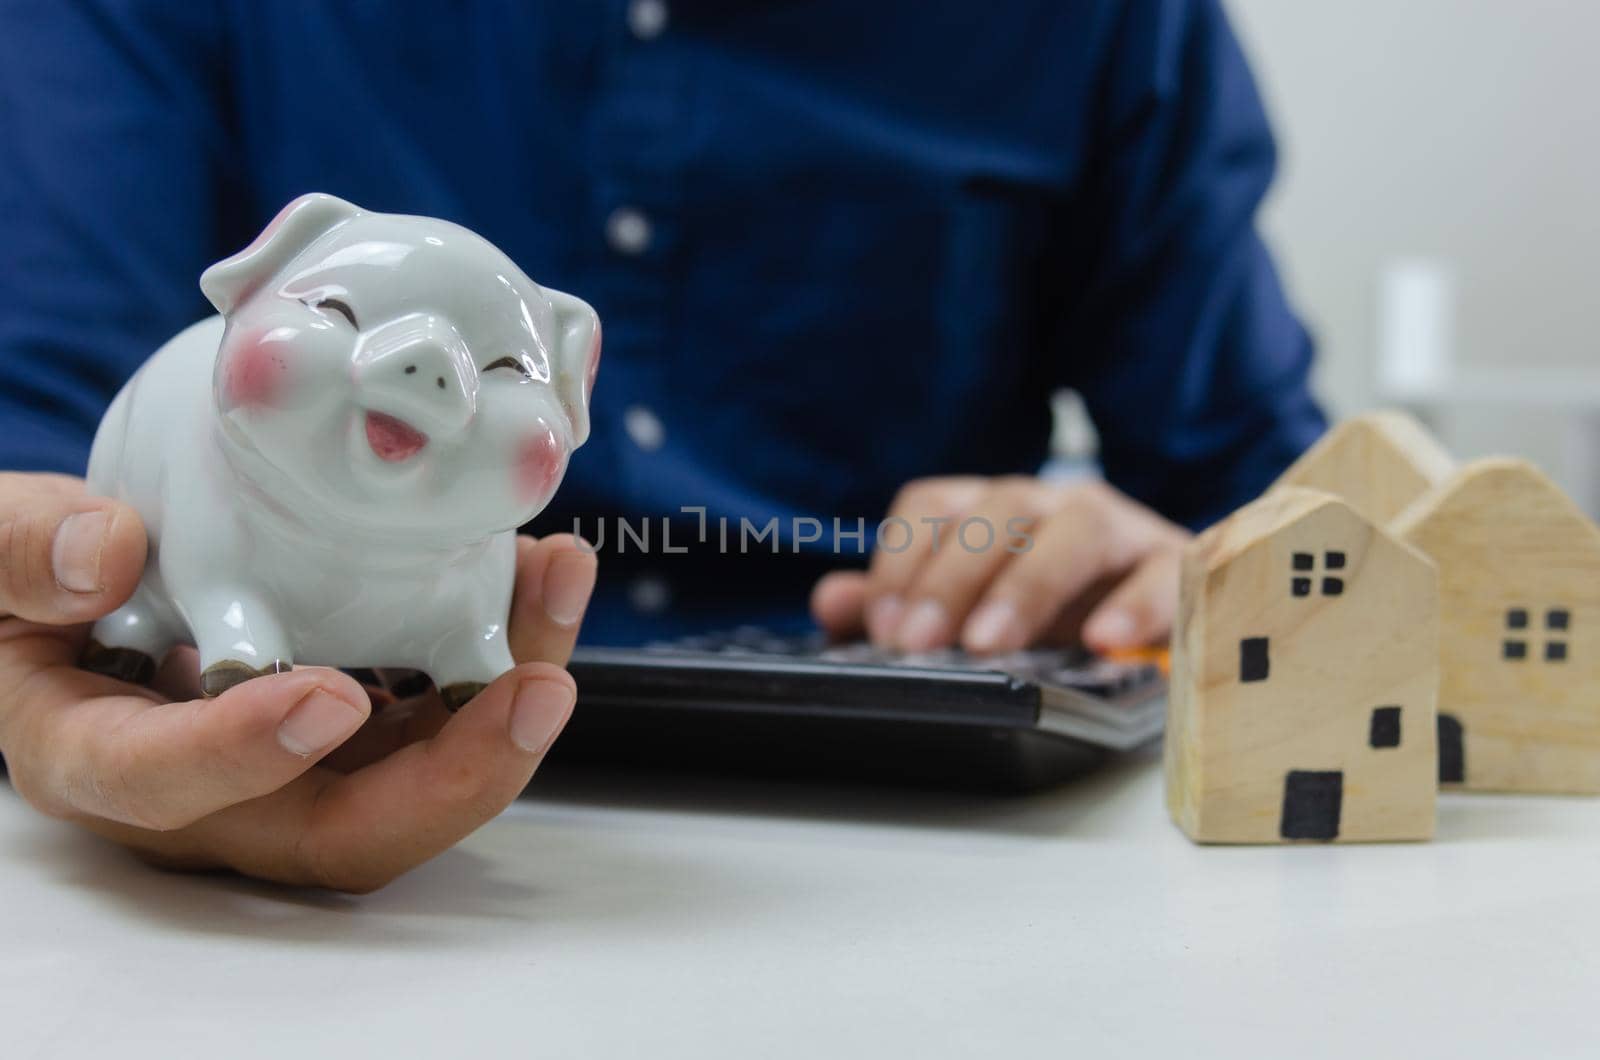 Saving a piggy bank for real estate and housing purchases. Business finance investments taxes or retirement money and concept insurance.